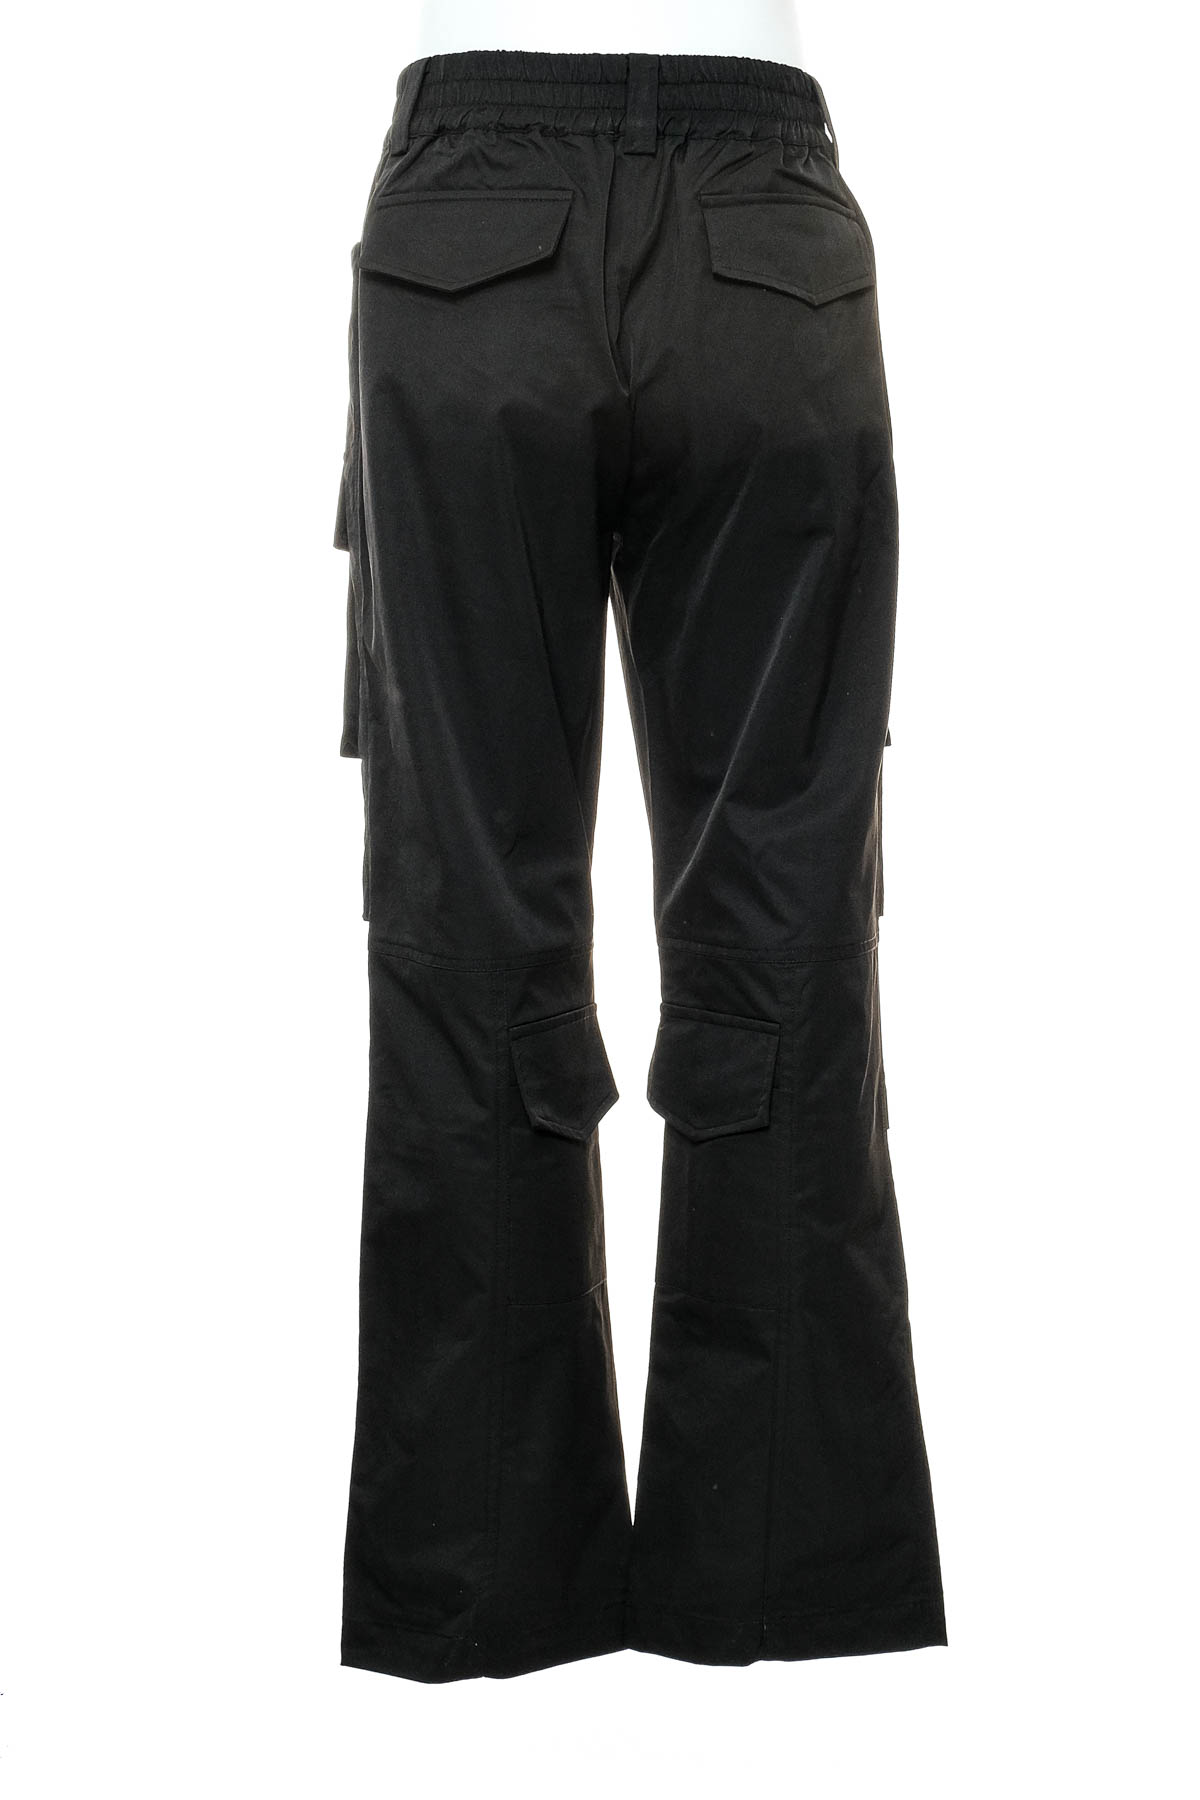 Men's trousers - Undefined - 1